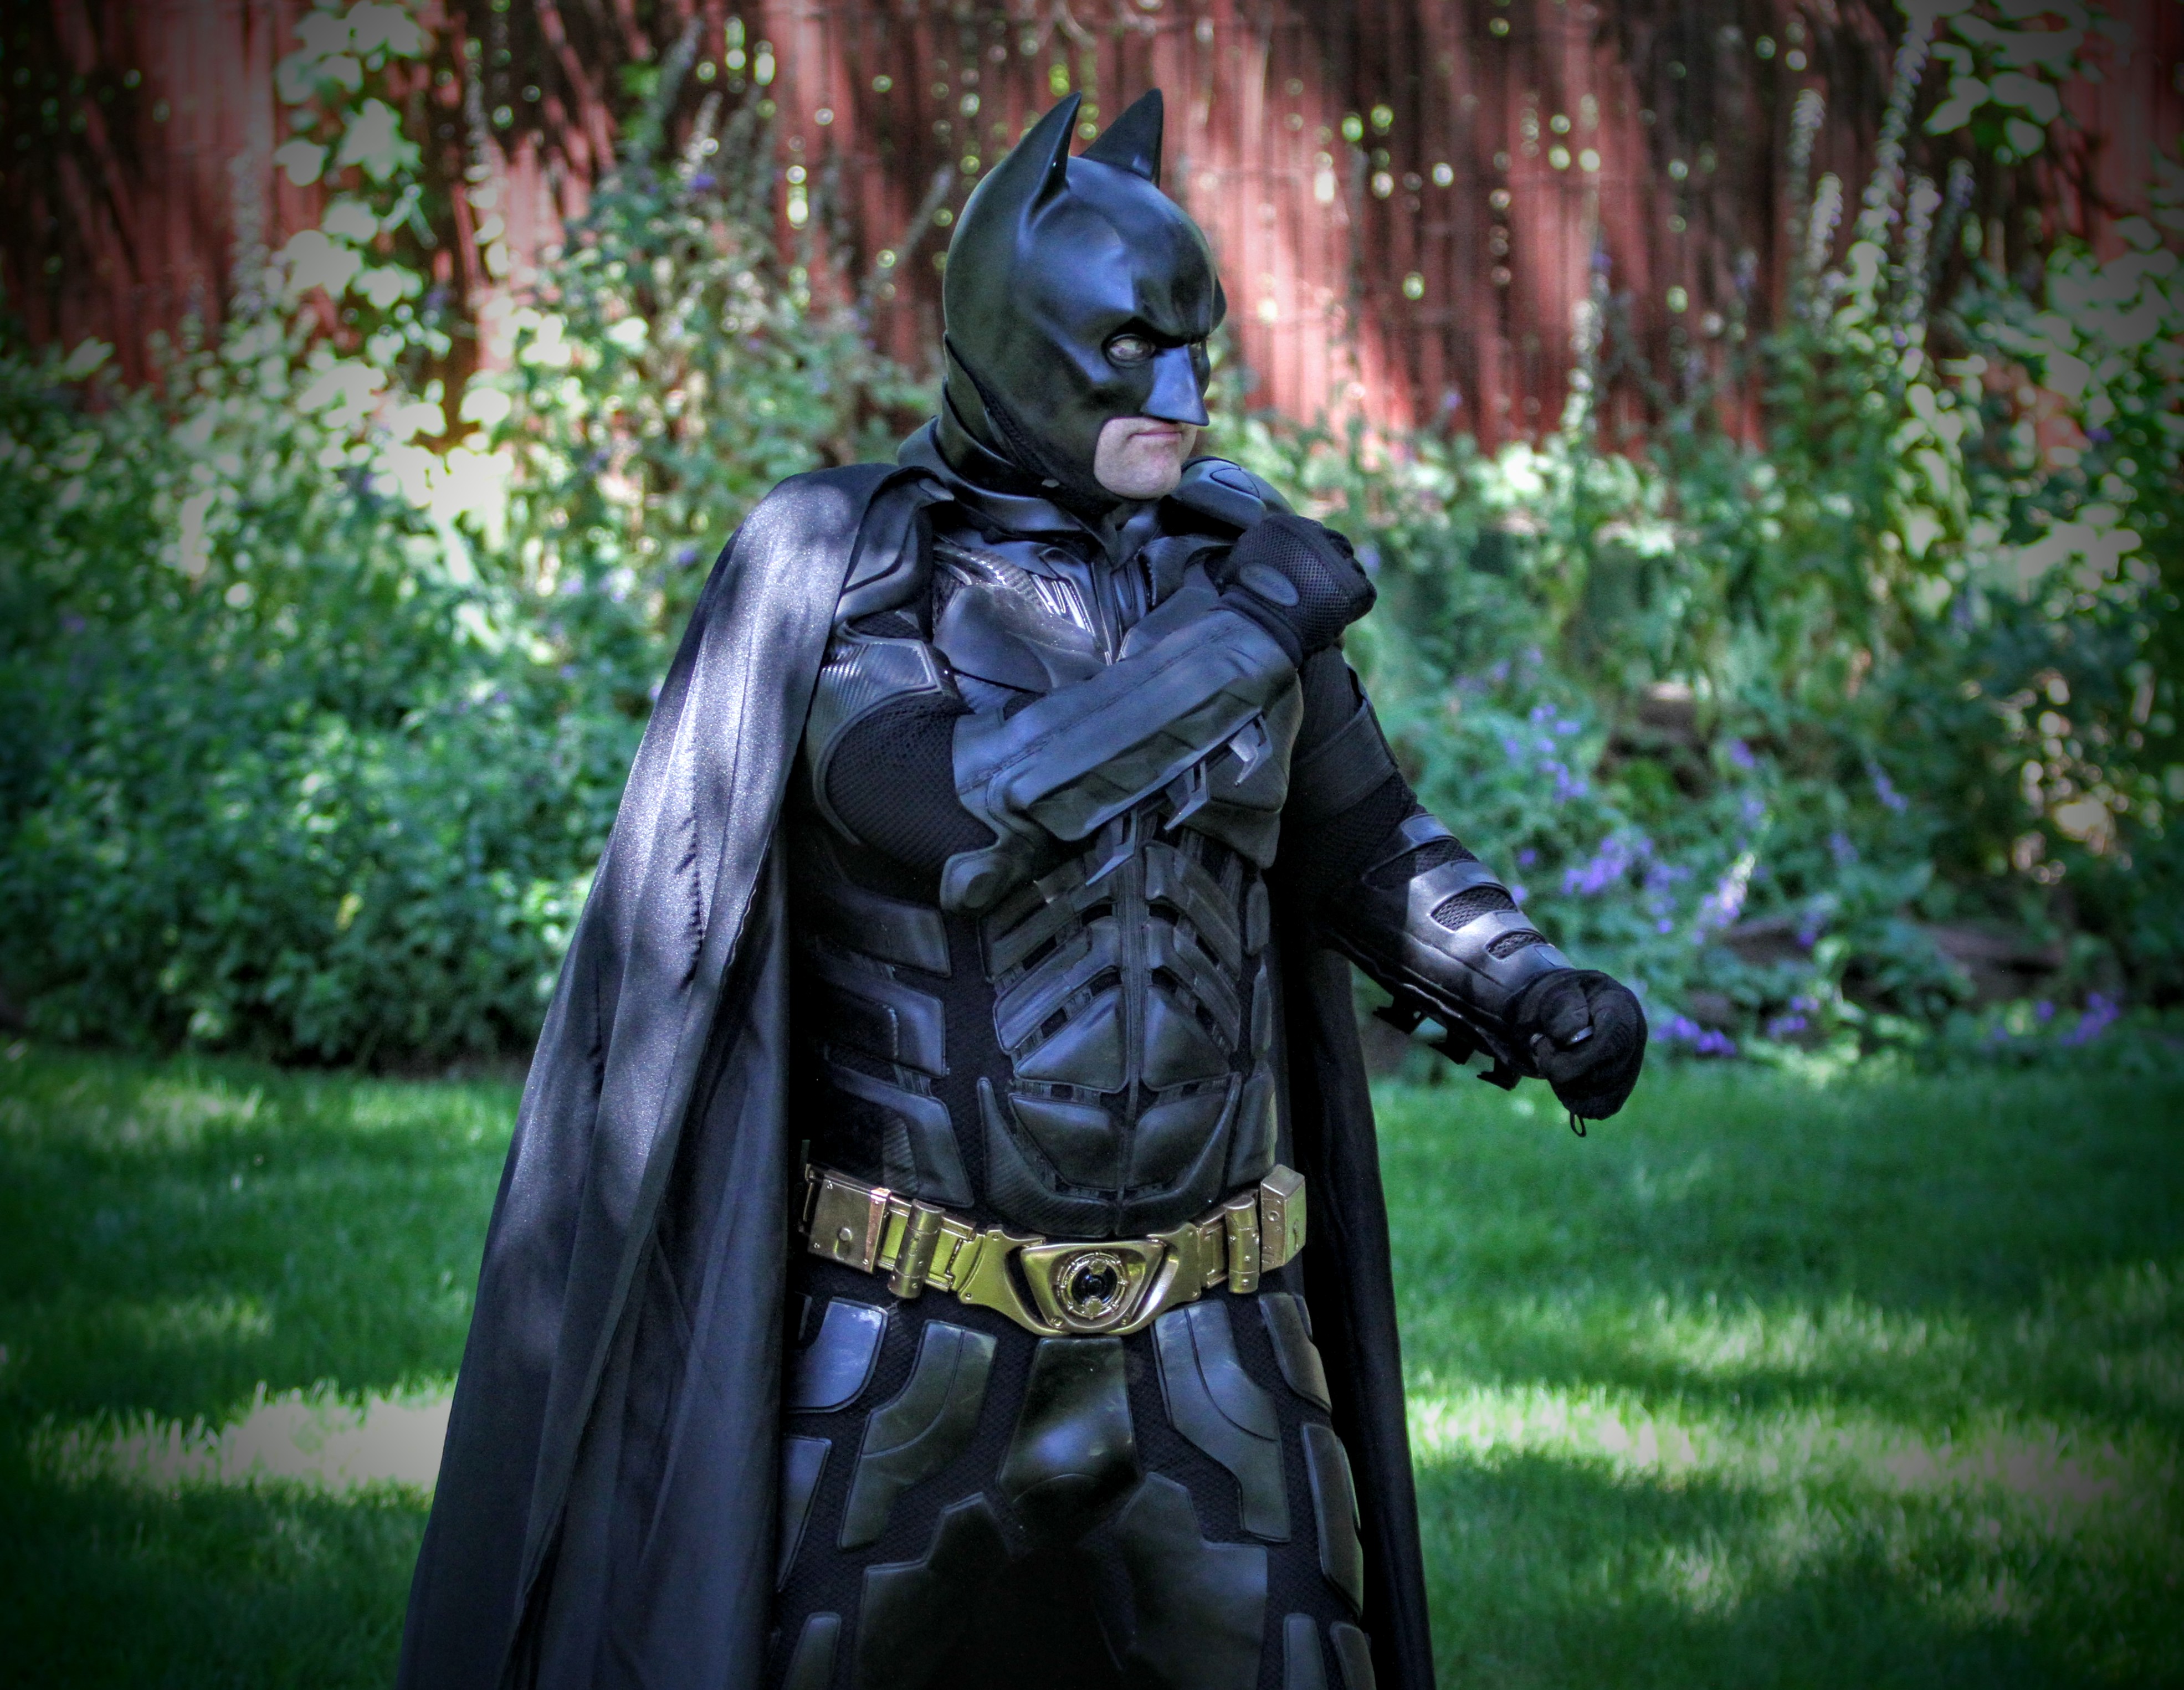 Just received my TDK suit! | RPF Costume and Prop Maker Community